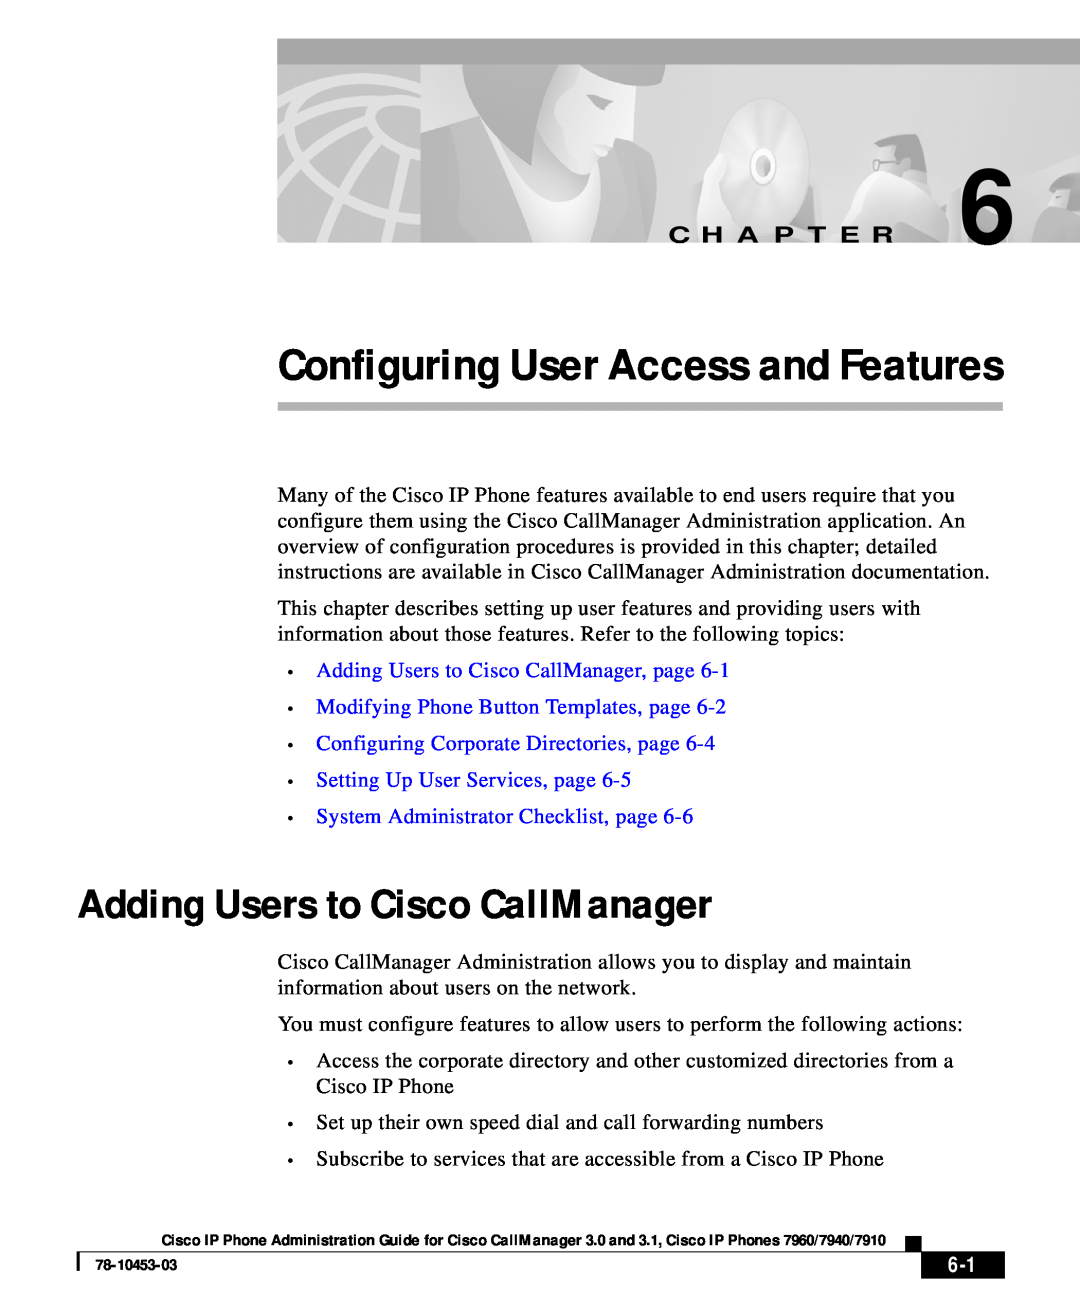 Cisco Systems 7910 user service Adding Users to Cisco CallManager, page, Modifying Phone Button Templates, page 